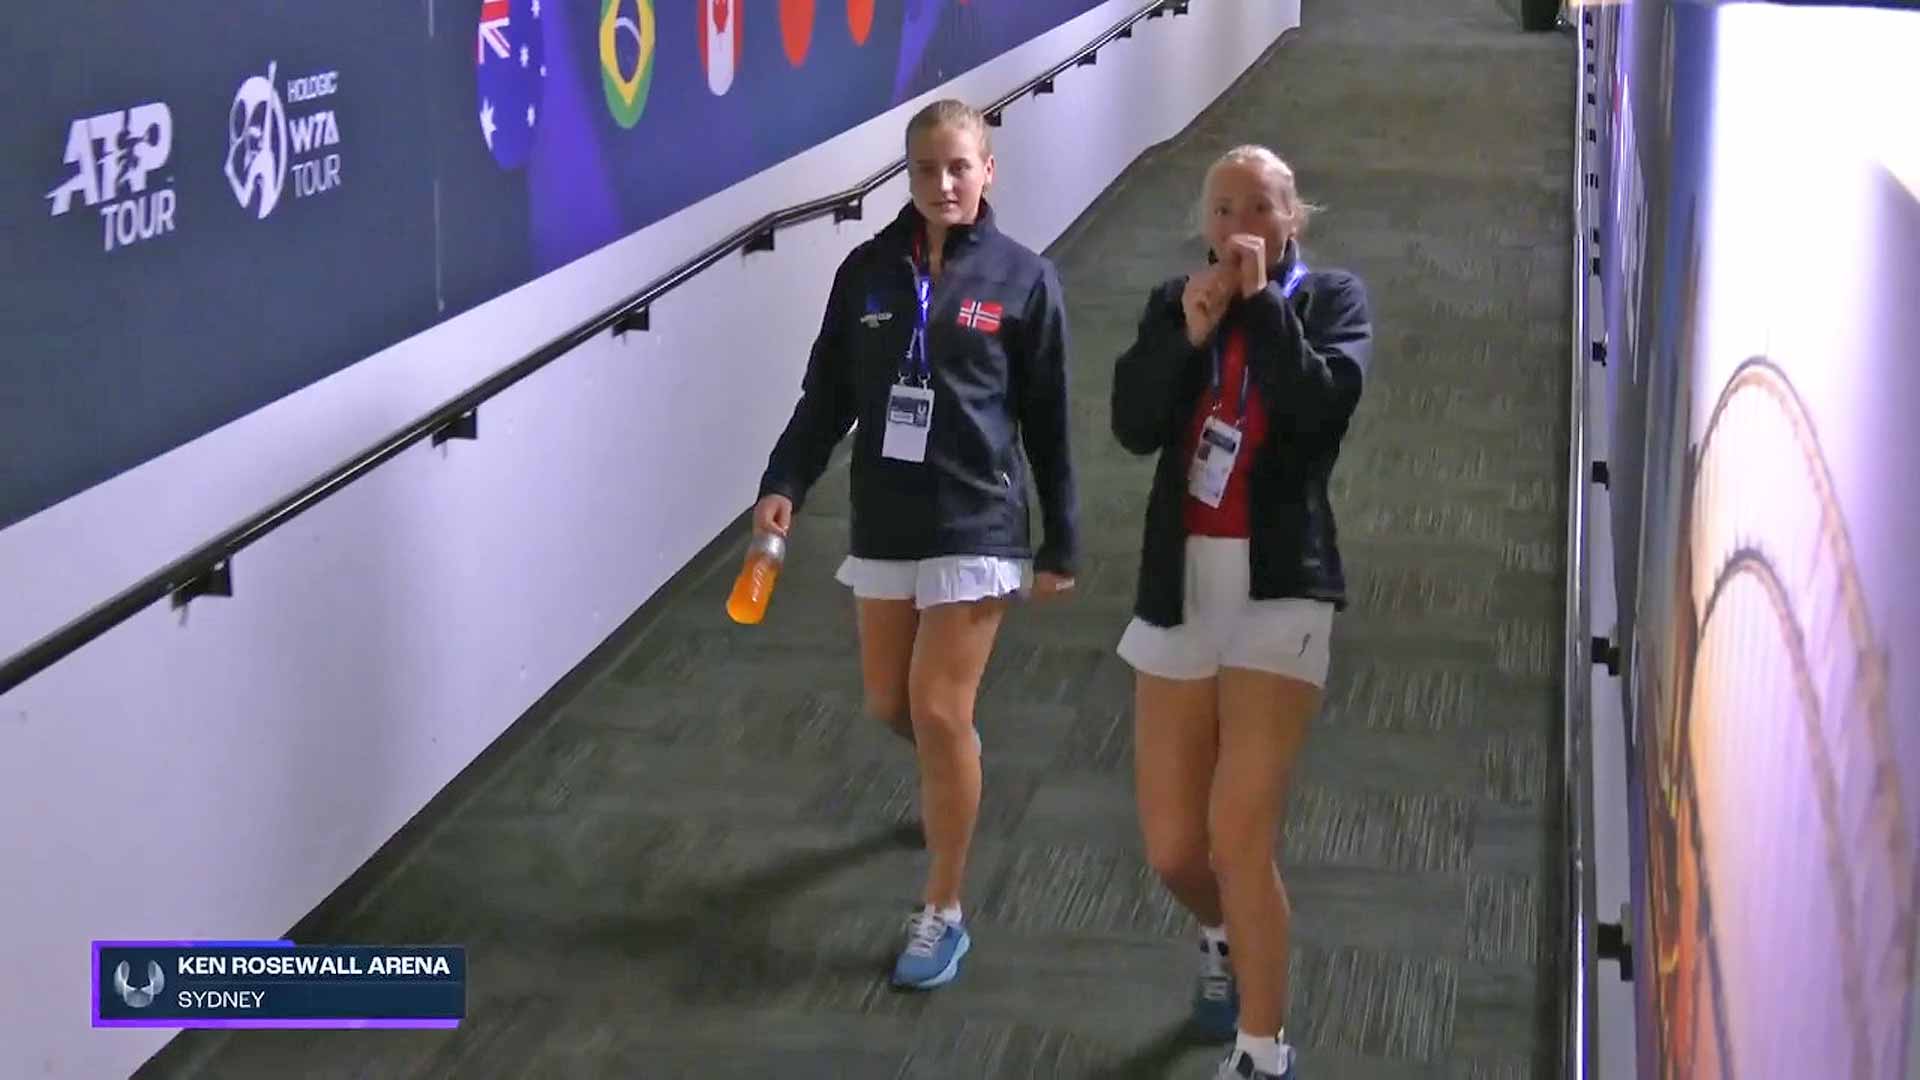 Casper Ruud's cousin and sister walk down a tunnel to Ken Rosewall Arena in Sydney.